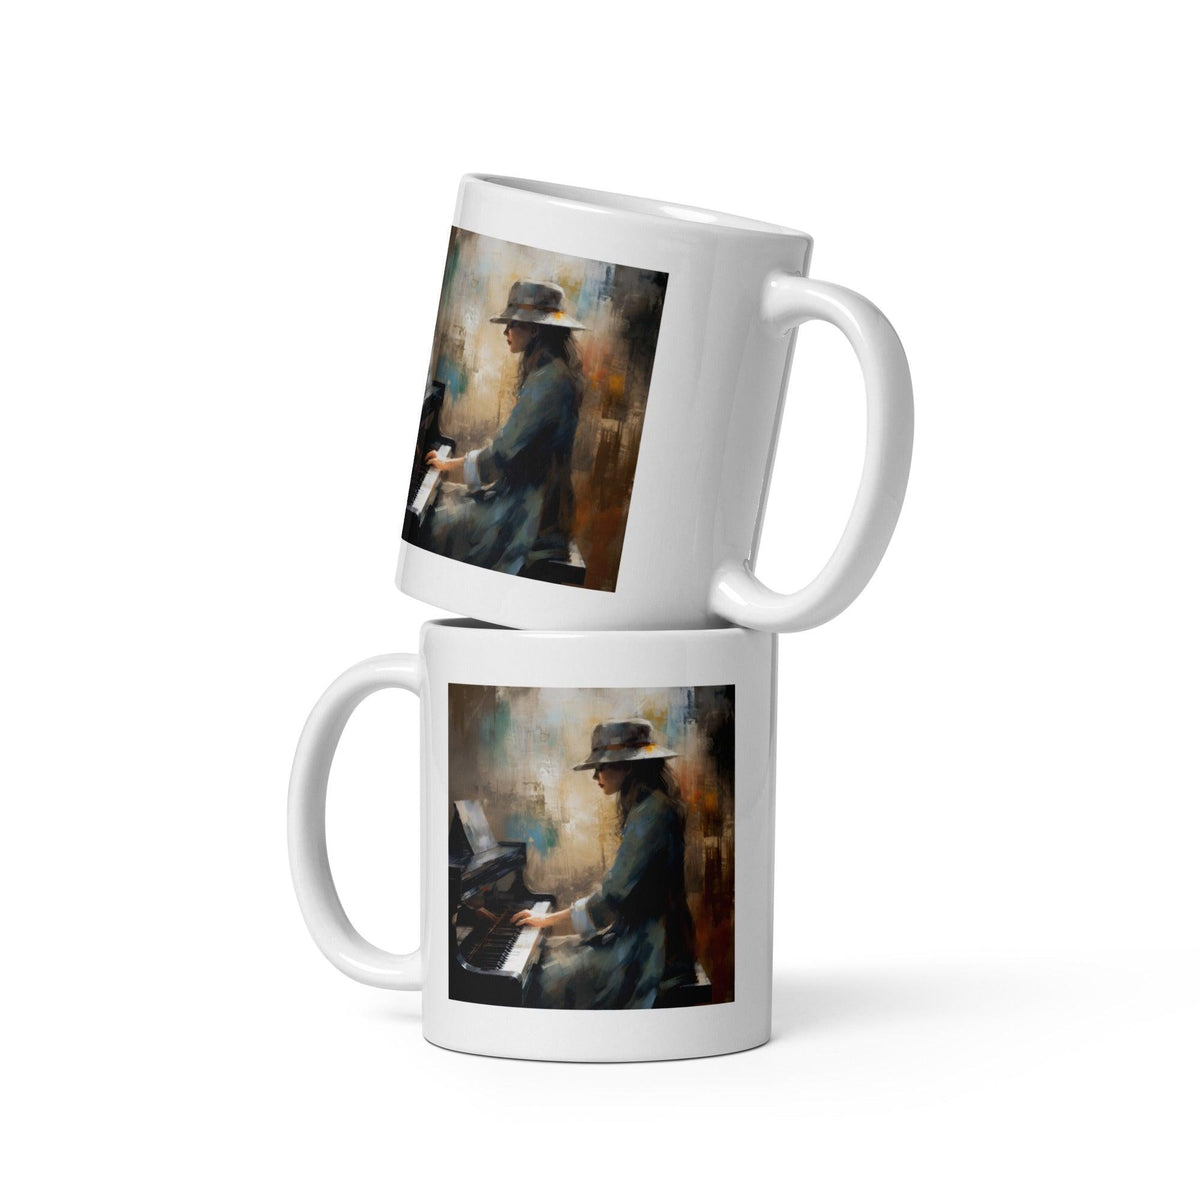 Elegant white glossy mug held in hands, filled with hot coffee